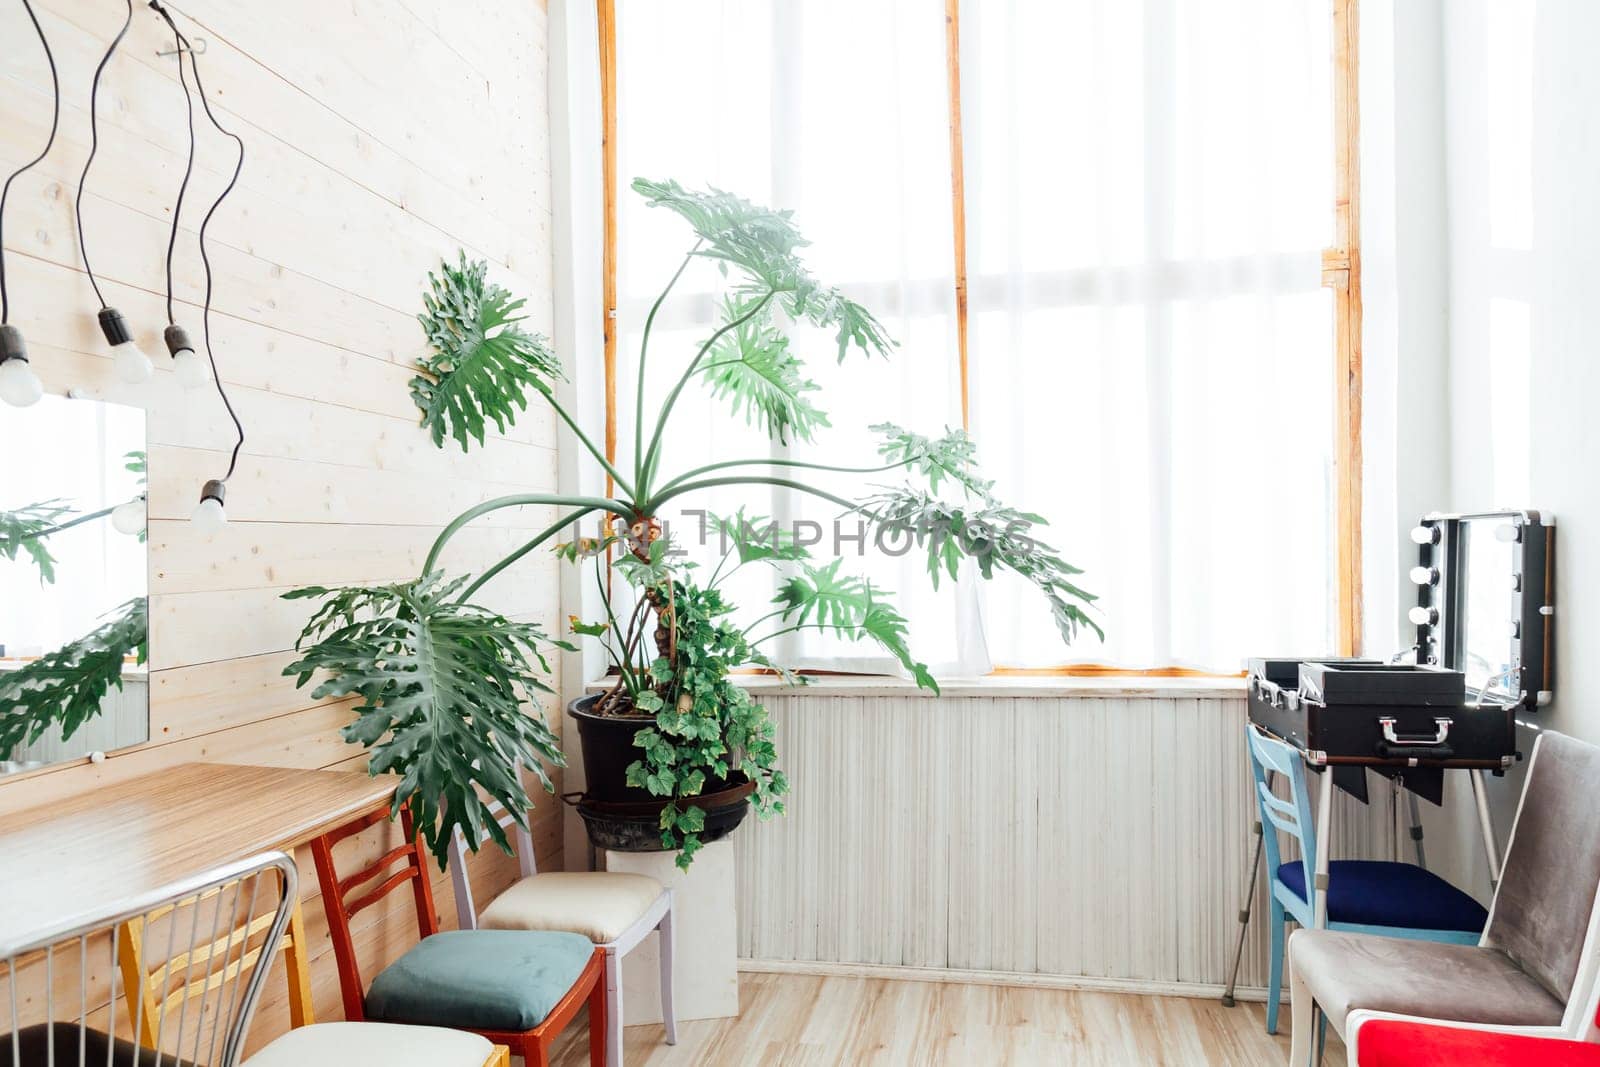 green house plant in the interior of the make-up artist's dressing room